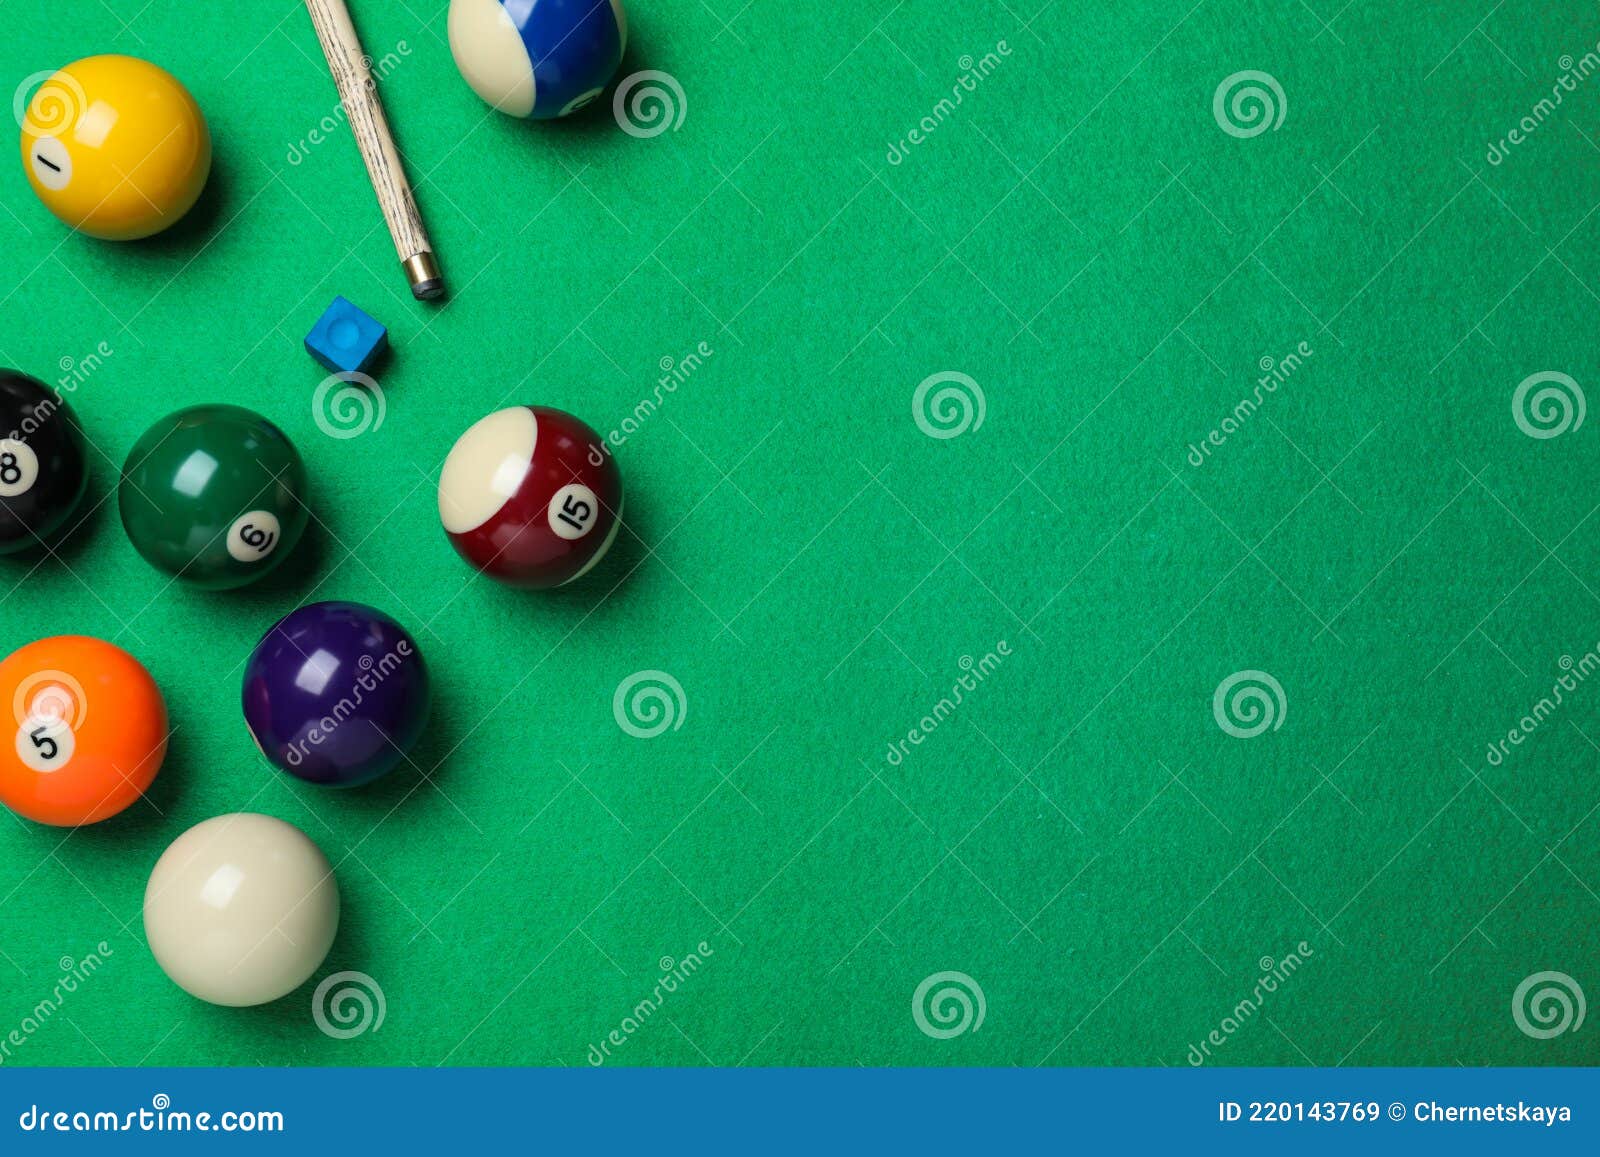 flat lay composition with balls on billiard table, space for text